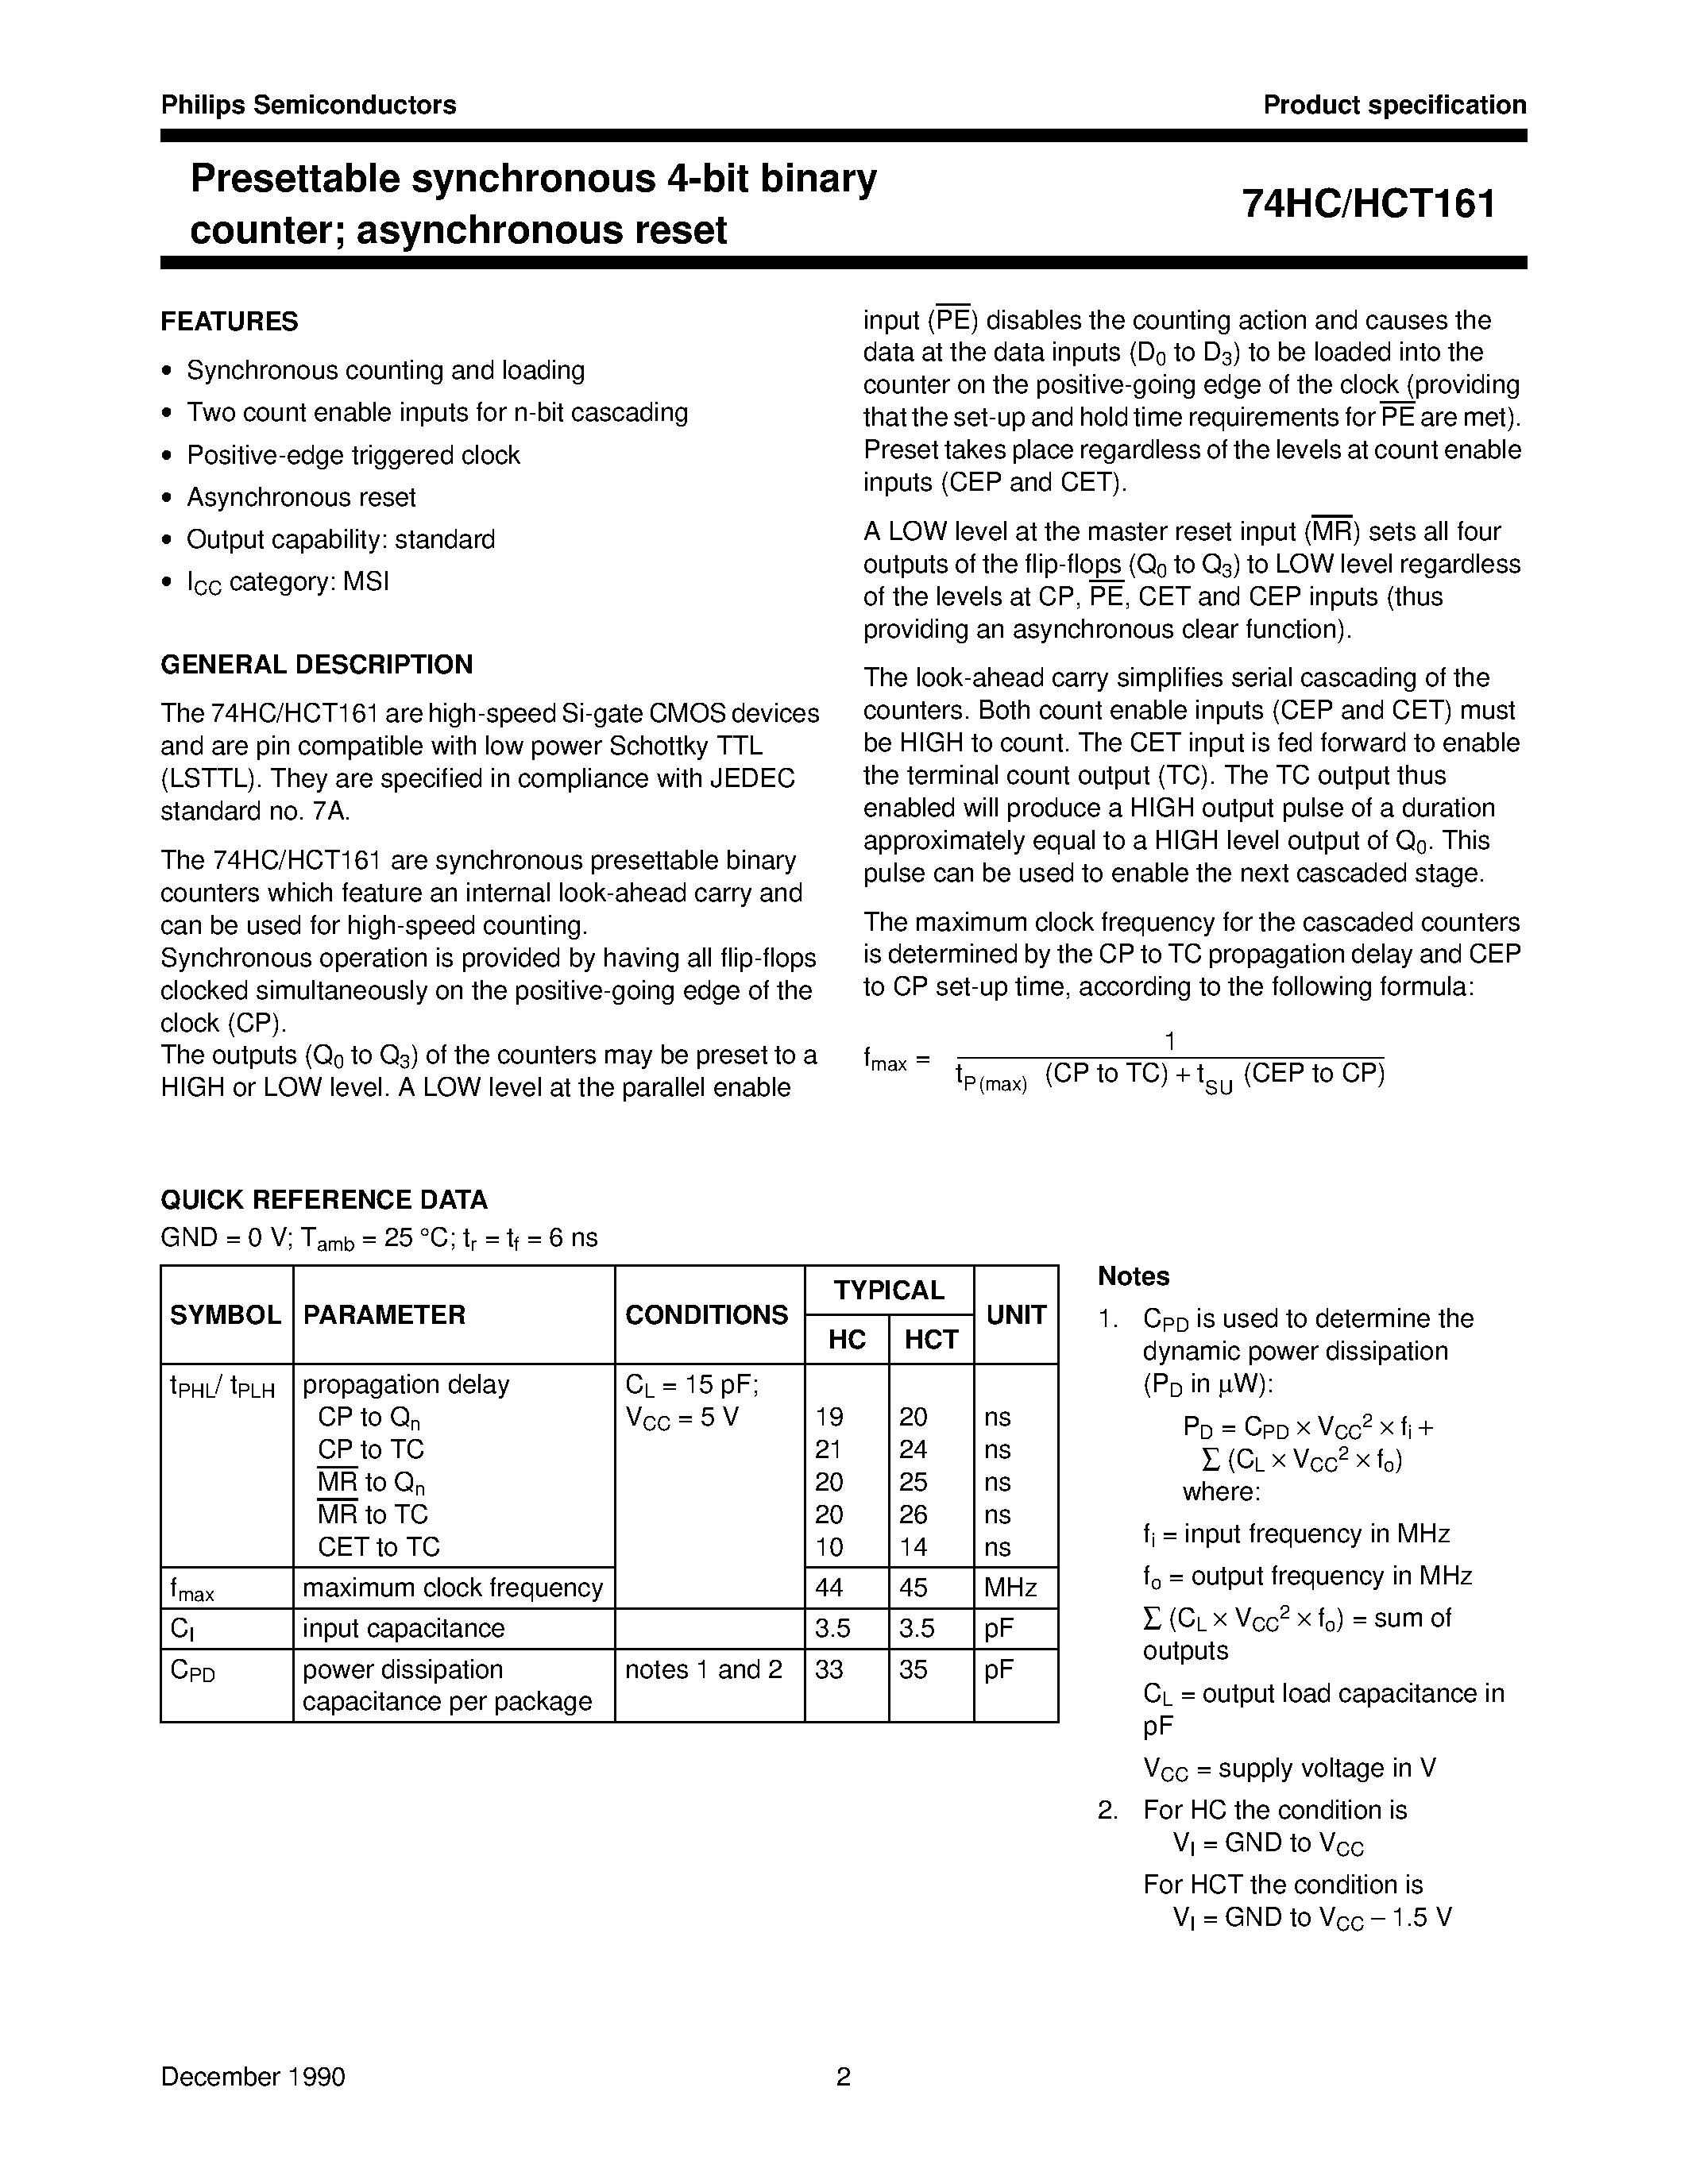 Datasheet 74HCT161 - Presettable synchronous 4-bit binary counter asynchronous reset page 2